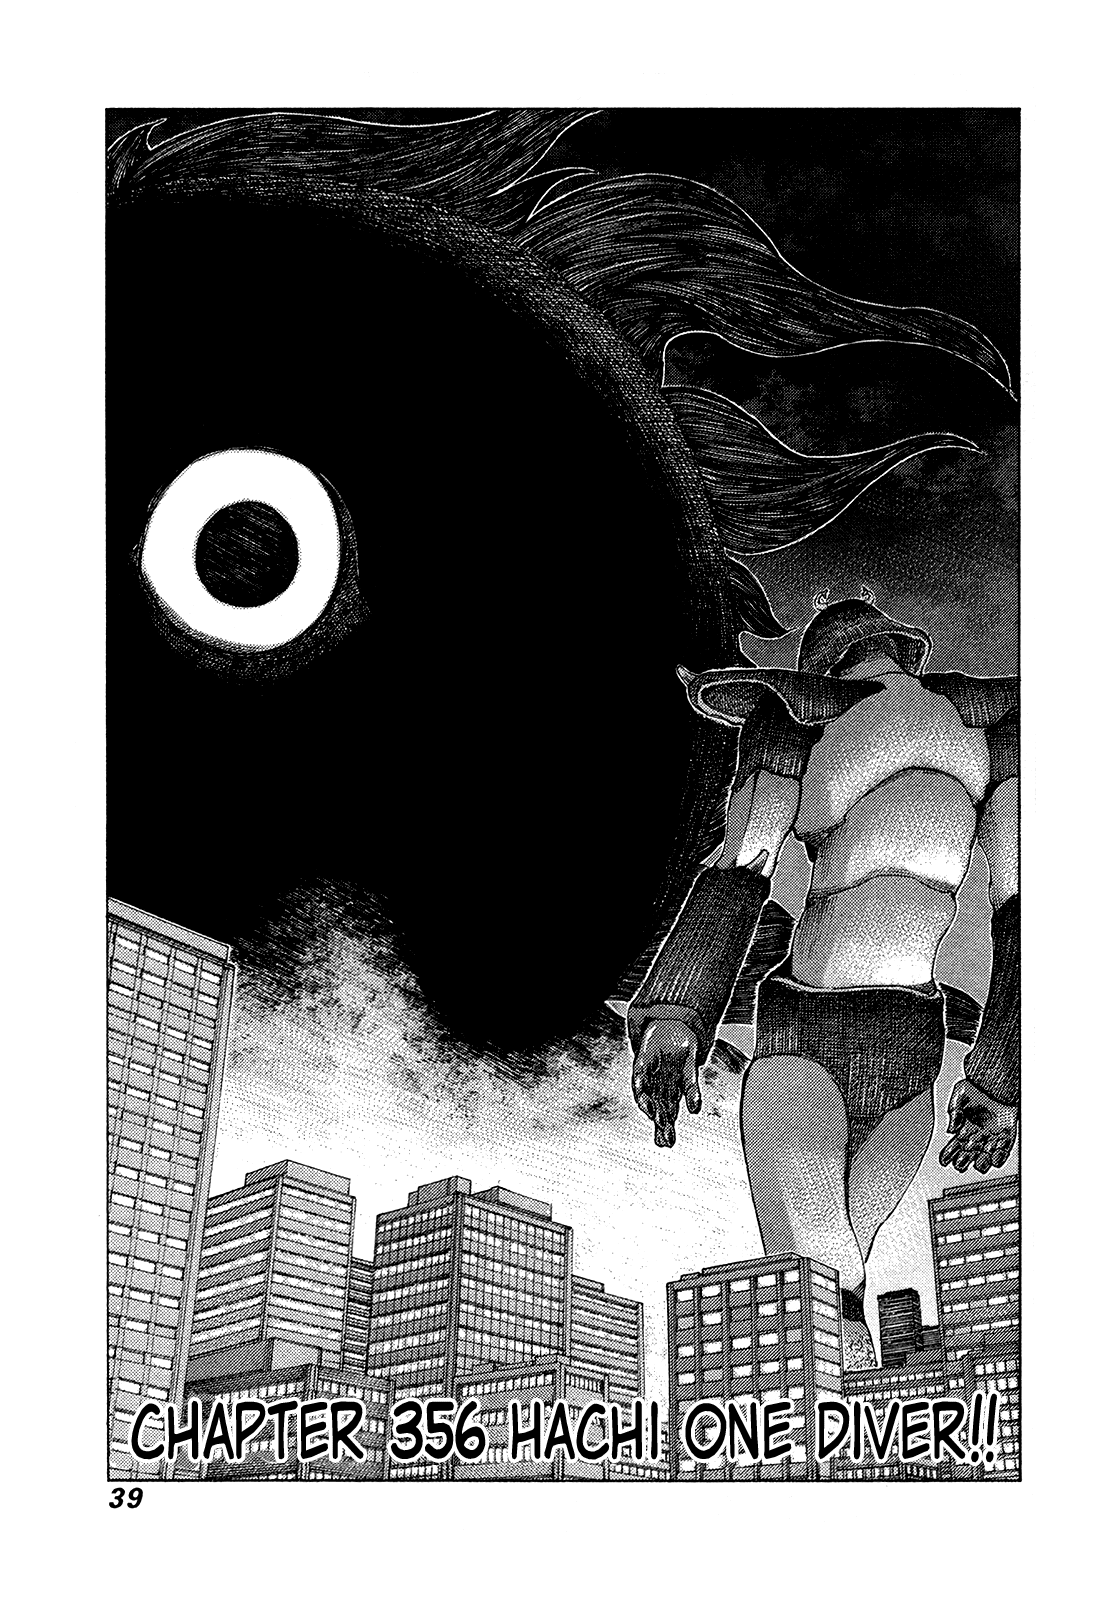 81 Diver chapter 356 - page 1